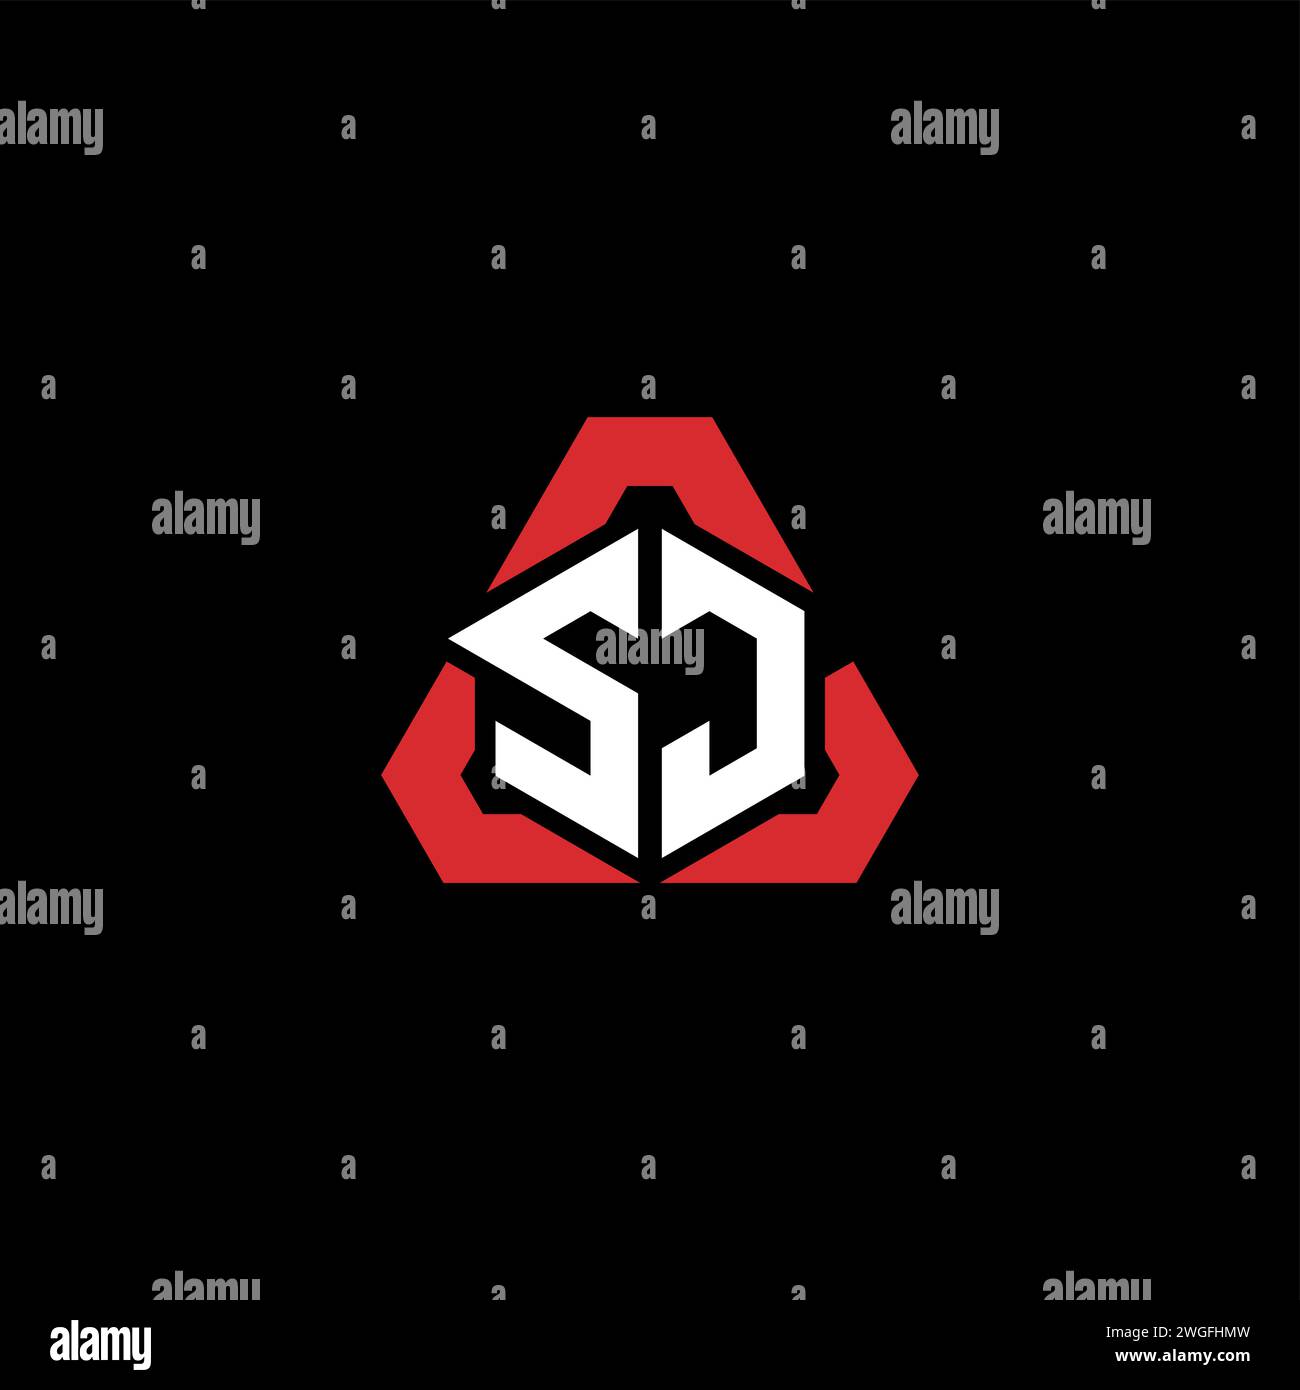 SJ initial logo modern and futuristic concept for esport or gaming logo Stock Vector